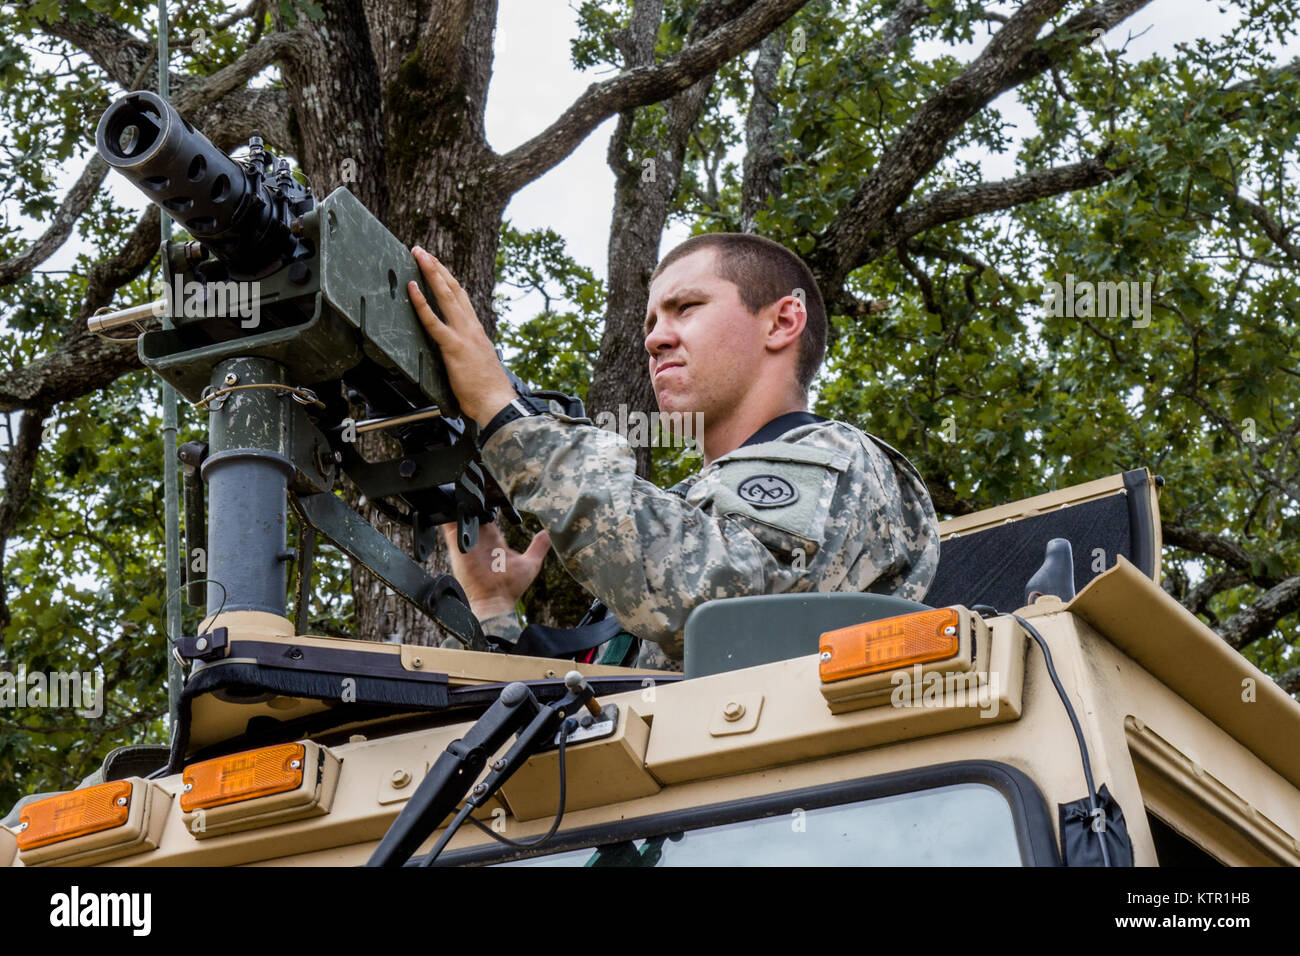 New York Army National Guard Private 1st Class Tyler Miner, an infantryman with the 2nd Battalion, 108th Infantry, installs an M2 .50 caliber machine gun to the roof of a tactical vehicle at the Army’s Joint Rotational Training Center, Ft. Polk, La., July 16, 2016.   More than 3,000 New York Army National Guard Soldiers deployed to Fort Polk, Louisiana for a three-week exercise at the Army’s Joint Readiness Training Center, July 9-30, 2016. (U.S. Army National Guard photo by Sgt. Michael Davis) Stock Photo